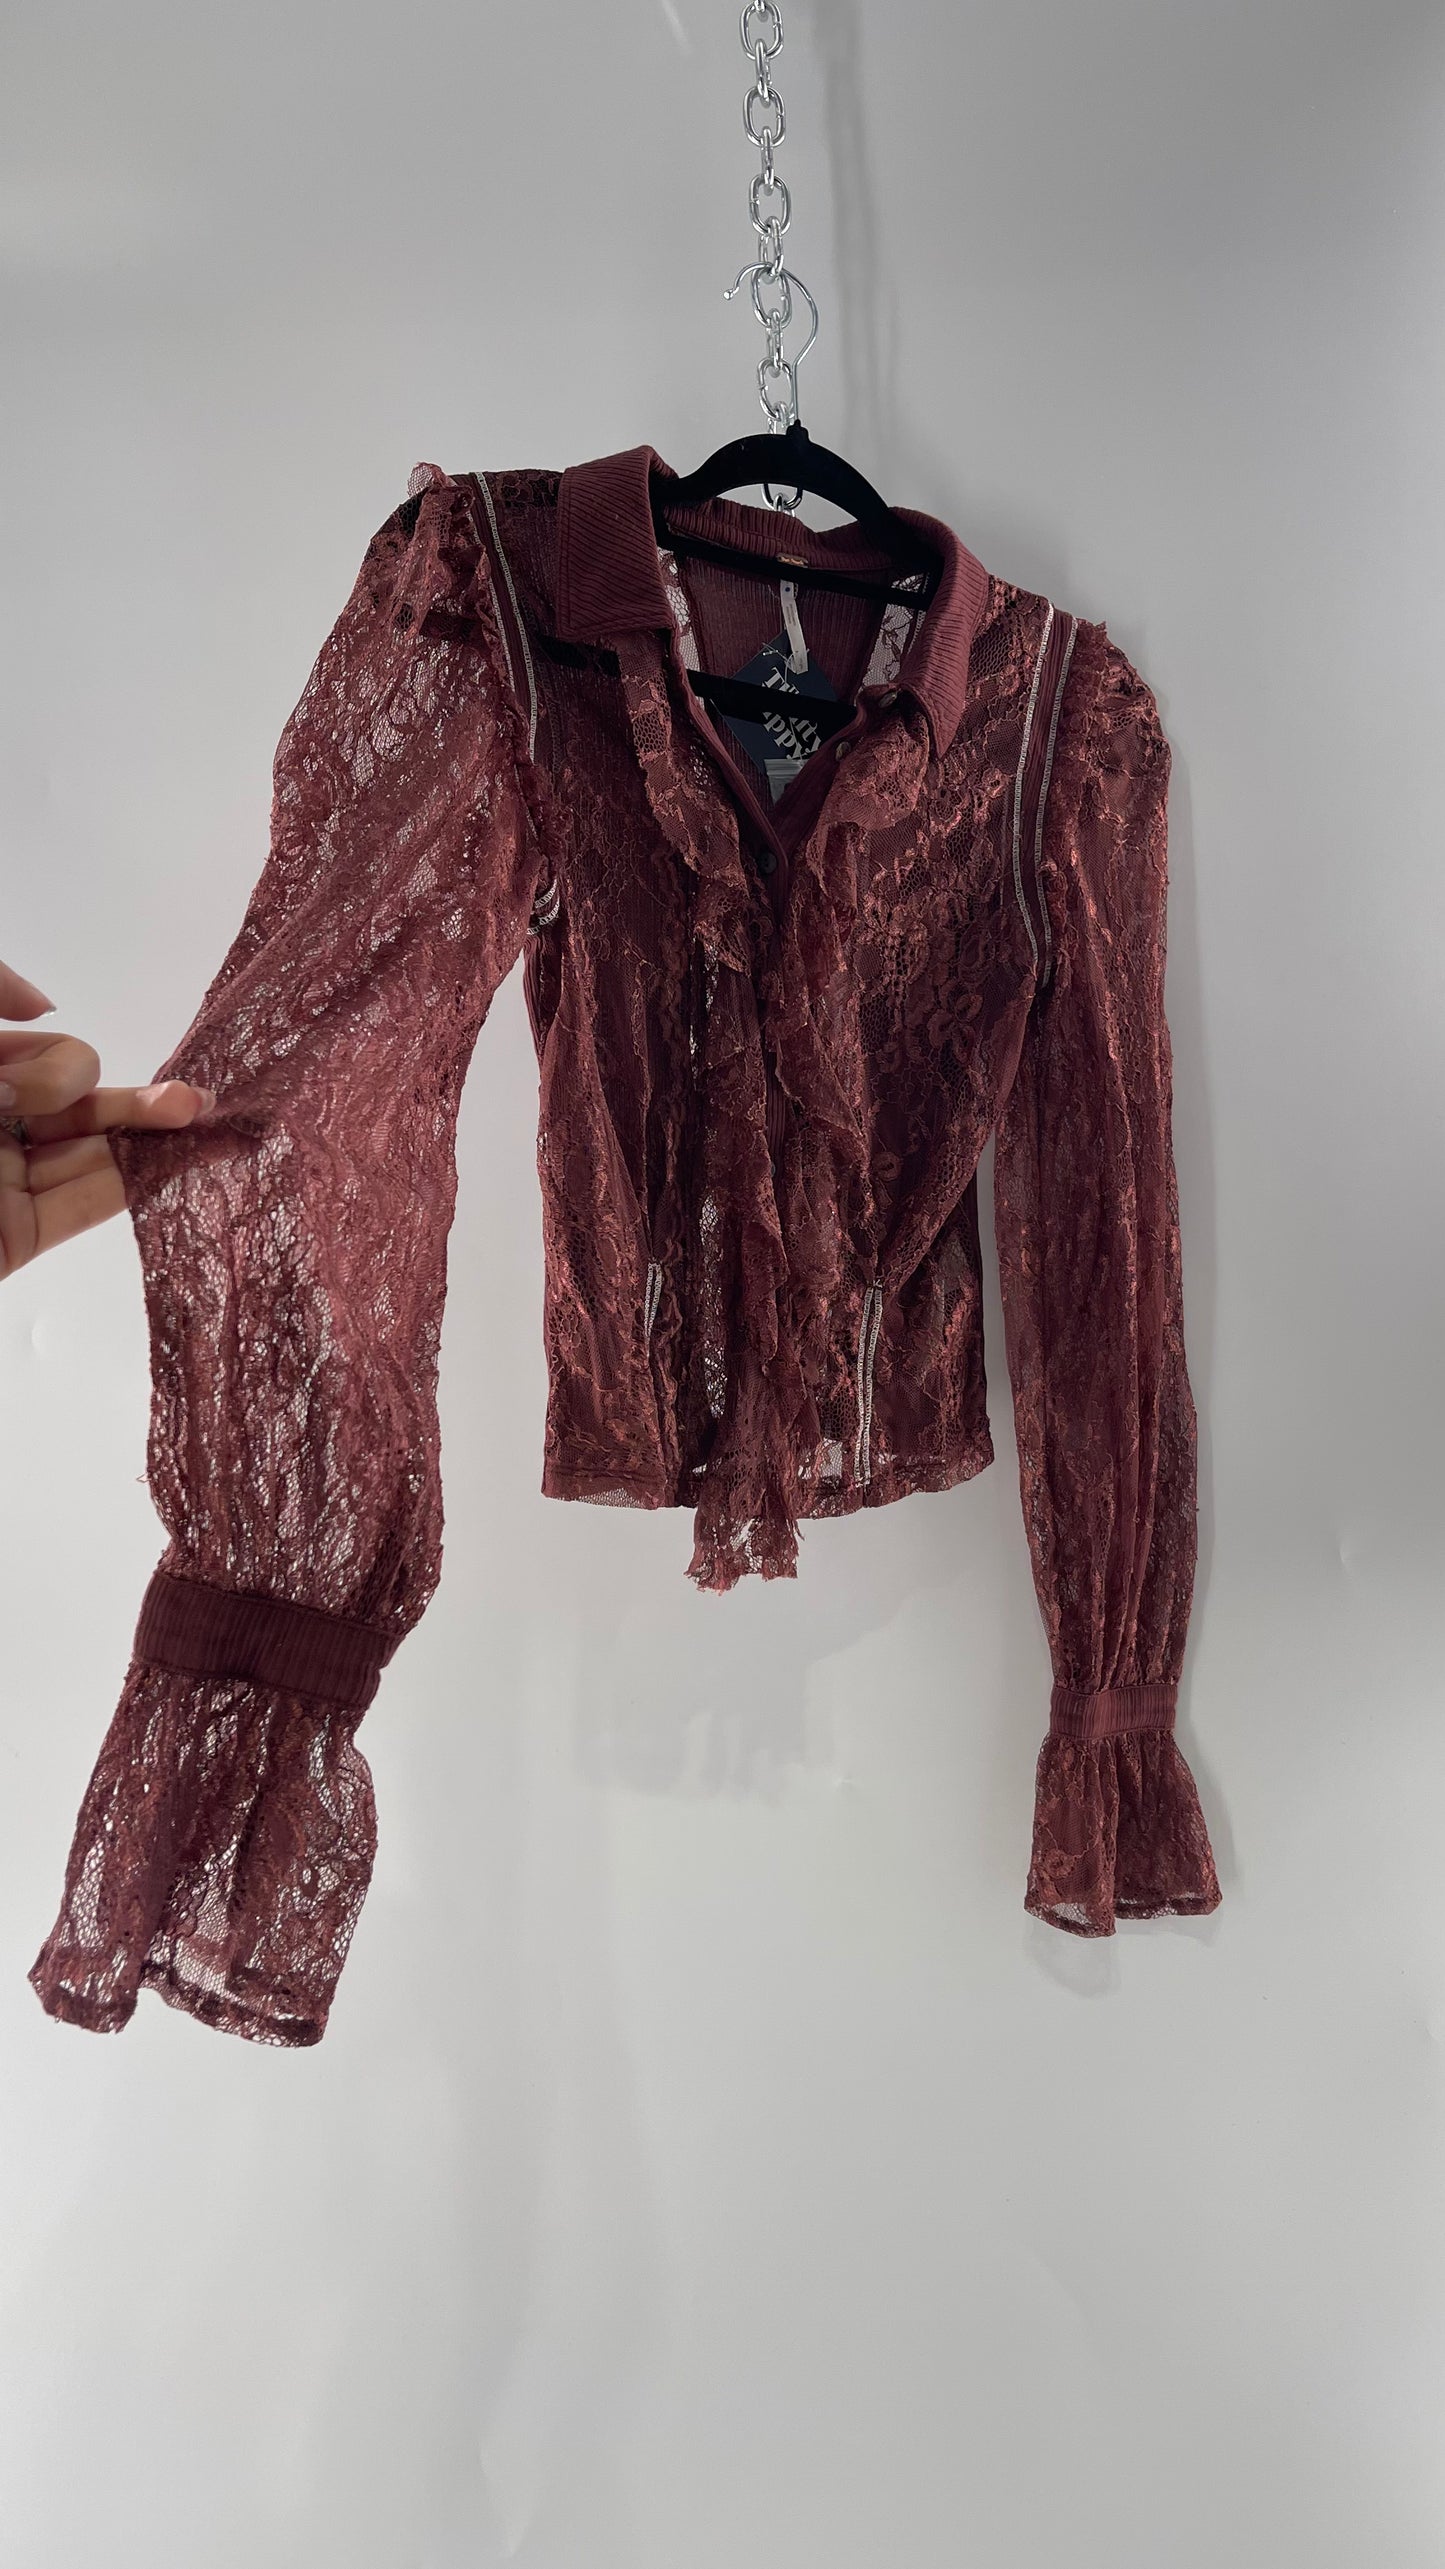 Free People Burgundy Lace Button Front Blouse with Balloon Sleeves and Ruffle Front Detail  (Small)